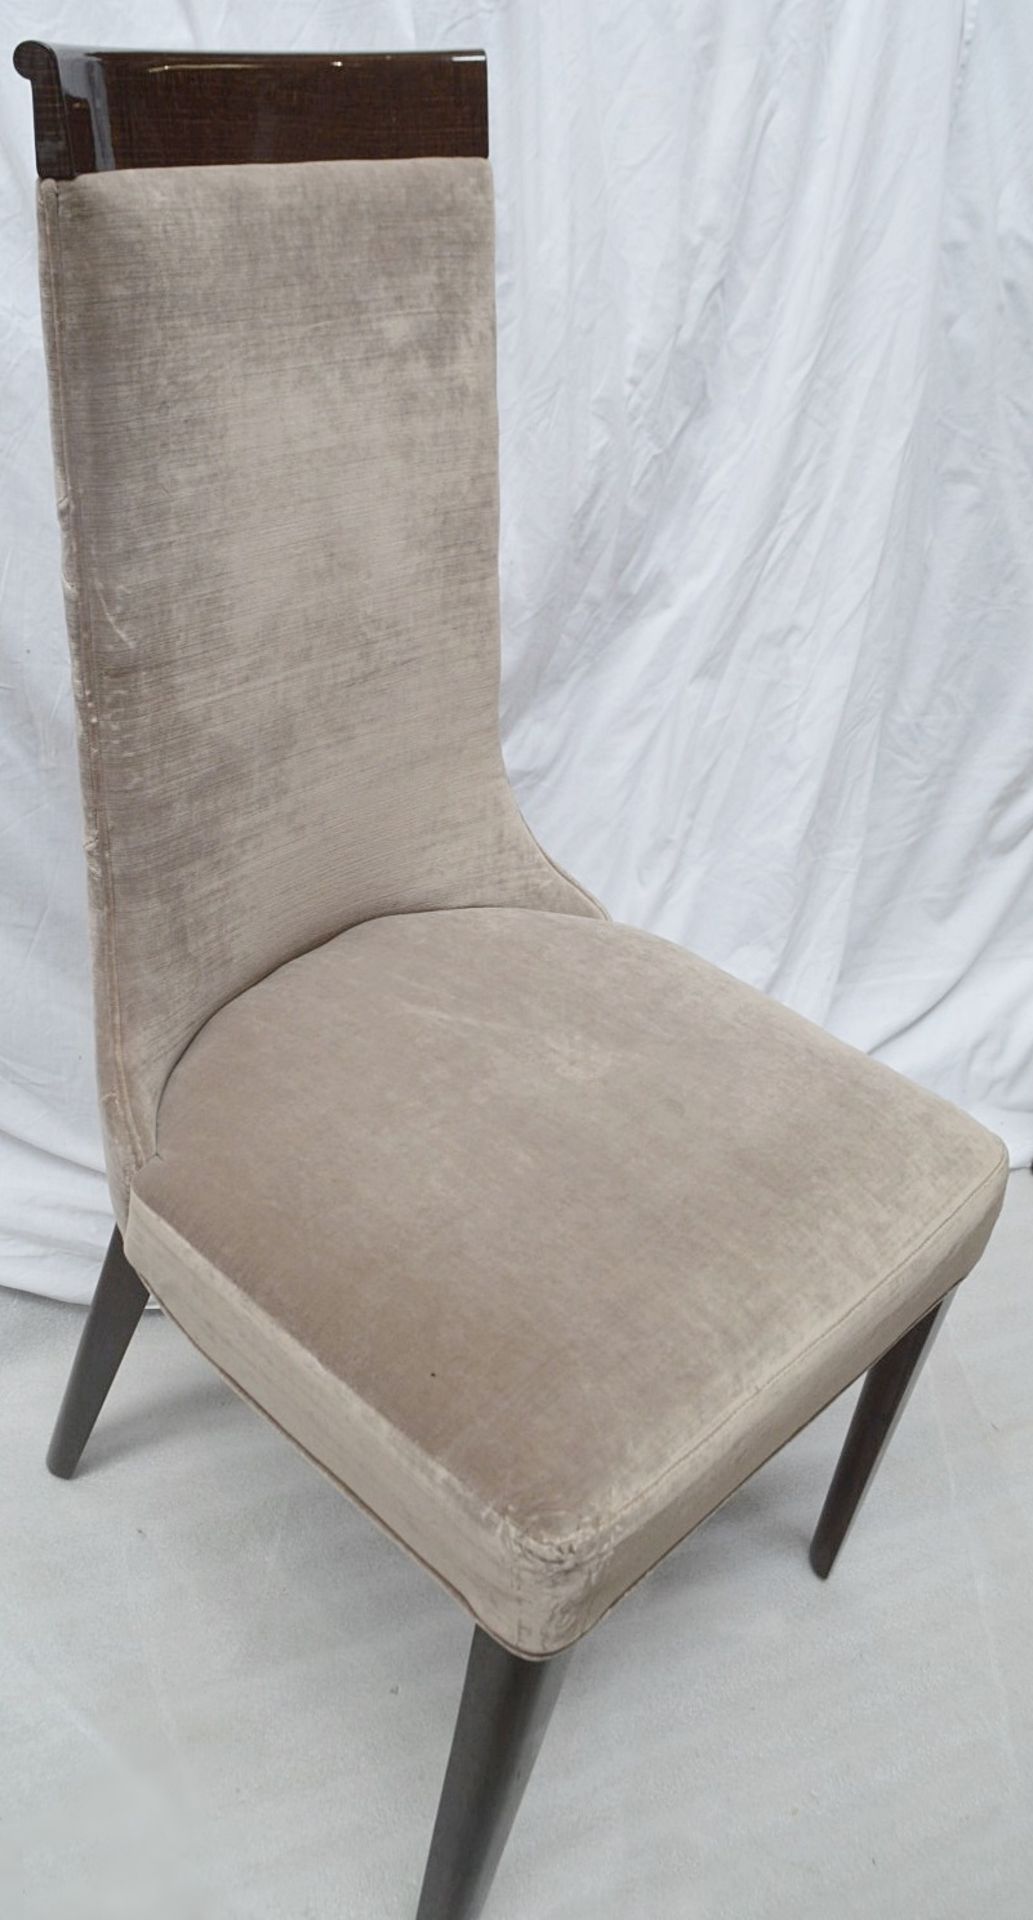 4 x GIORGIO Coliseum Velvet Upholstered Button Back Side Chairs With A Brazilian Rosewood Finish - - Image 7 of 11